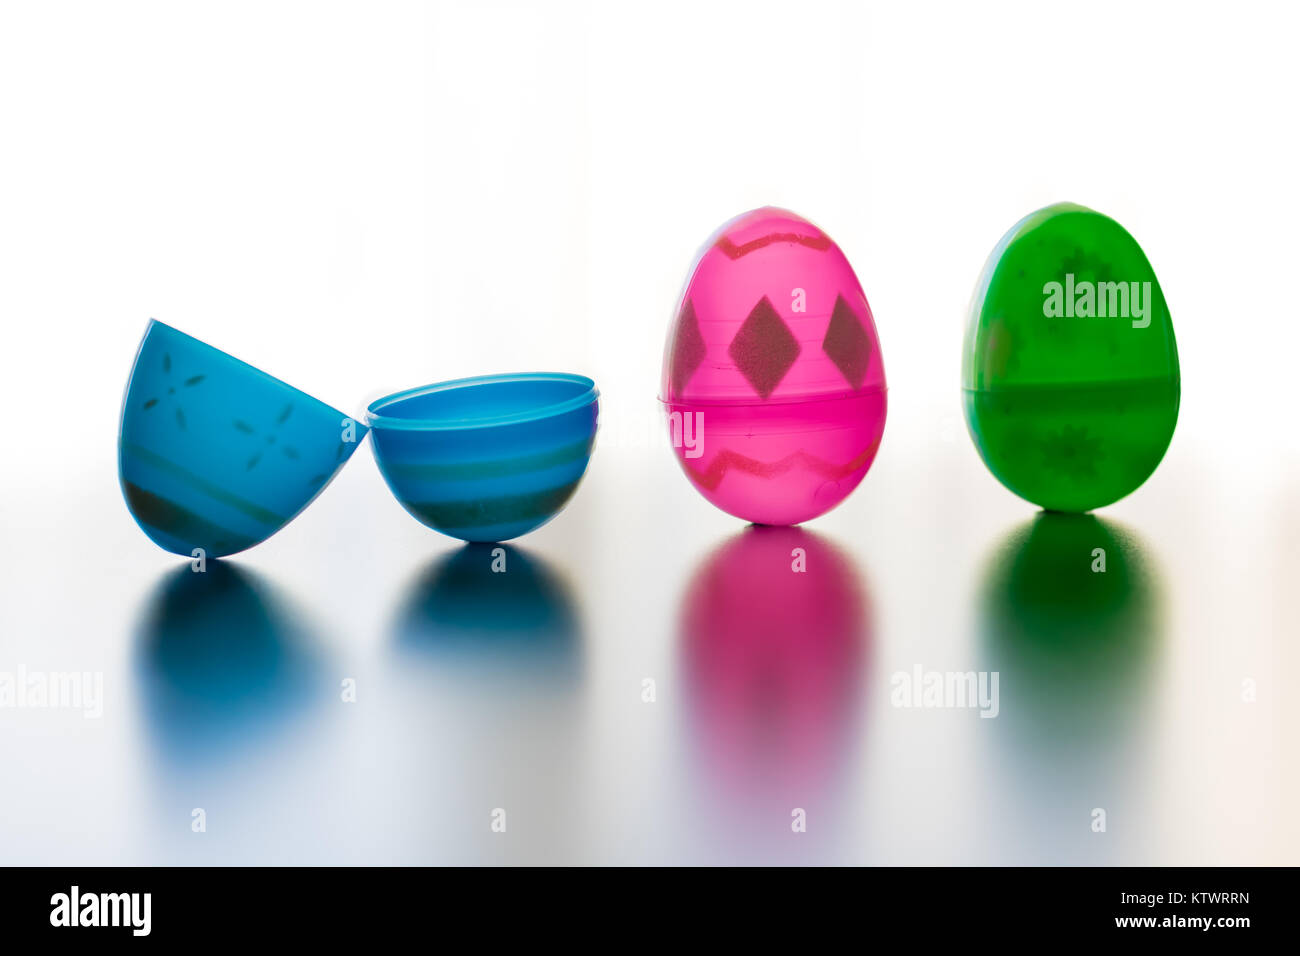 Blue, pink and green designed easter eggs are photographed stand up. The blue egg is opened symbalizing Jesus' openned tomb. The eggs cast colored sha Stock Photo